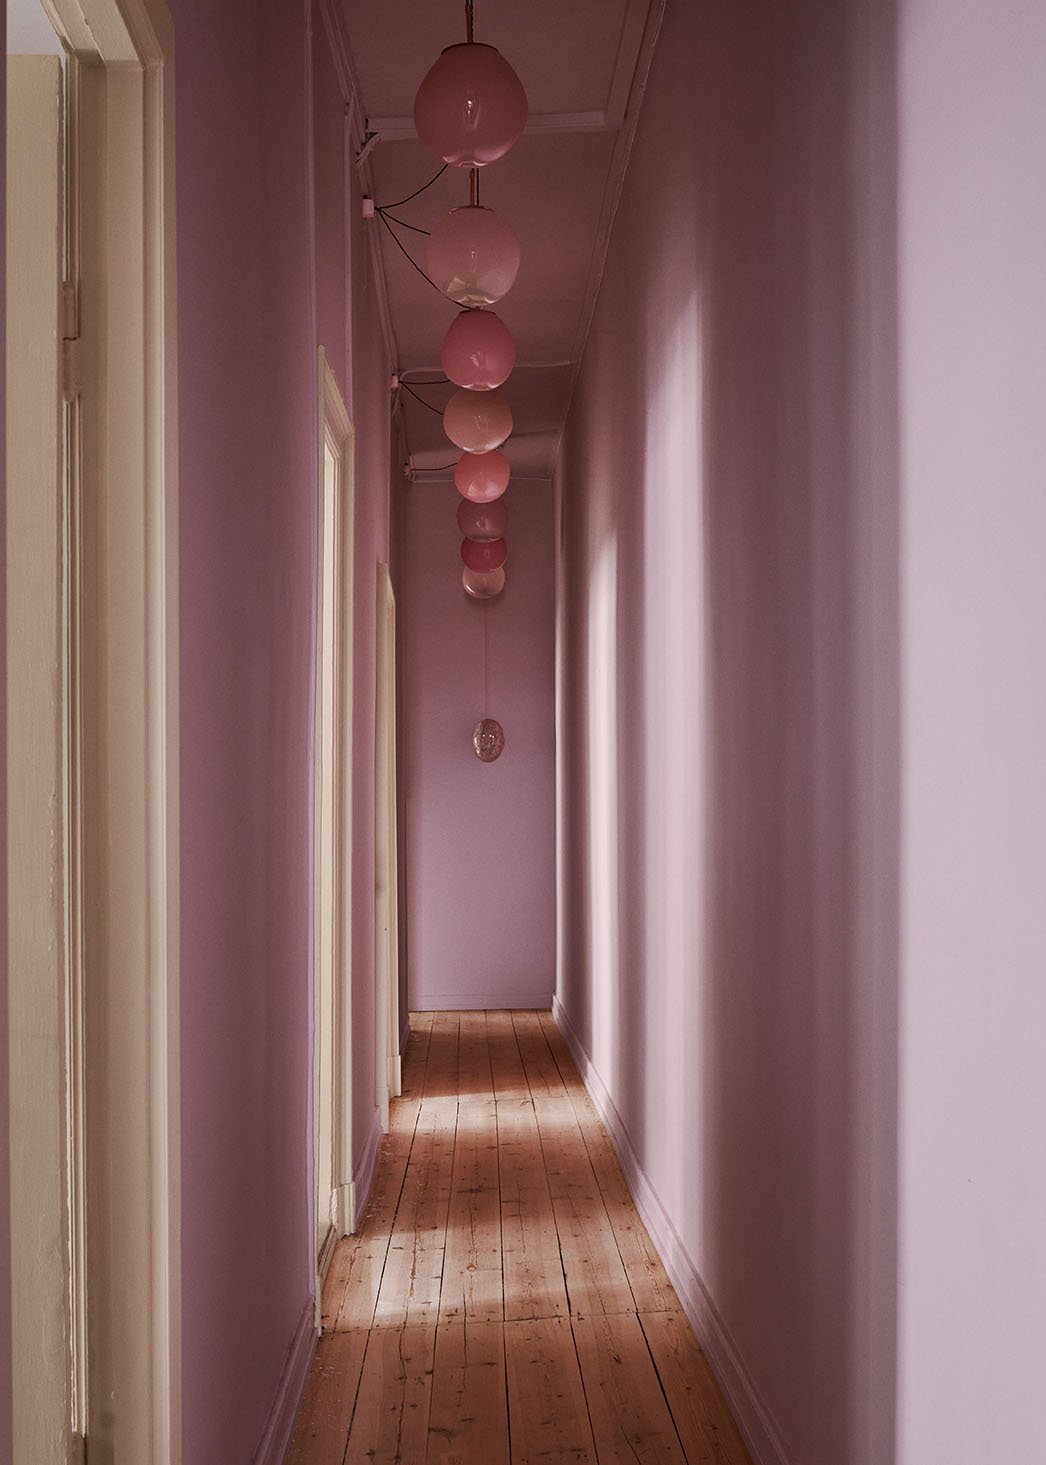 Walls and ceiling painted with 'Desert Rose'